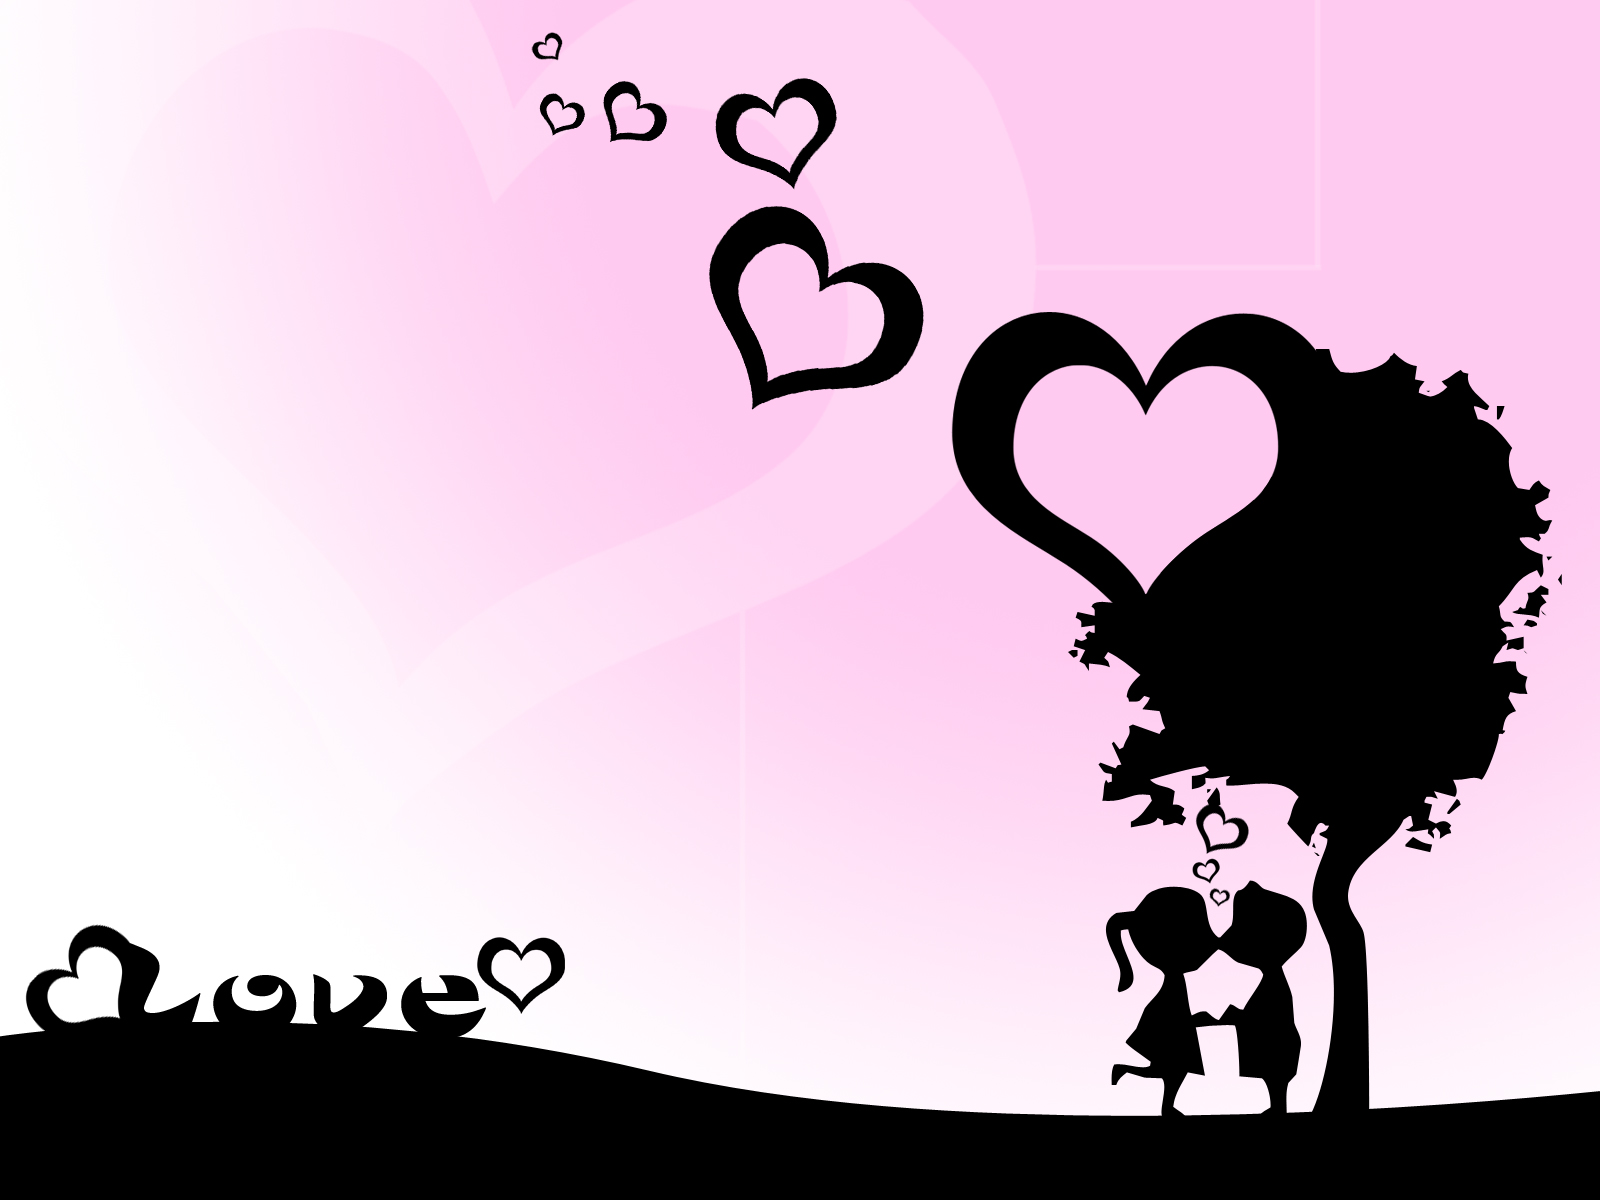 Free Download Cute Love Hd Desktop Wallpapers High Quality Wallpaperswallpaper [1600x1200] For